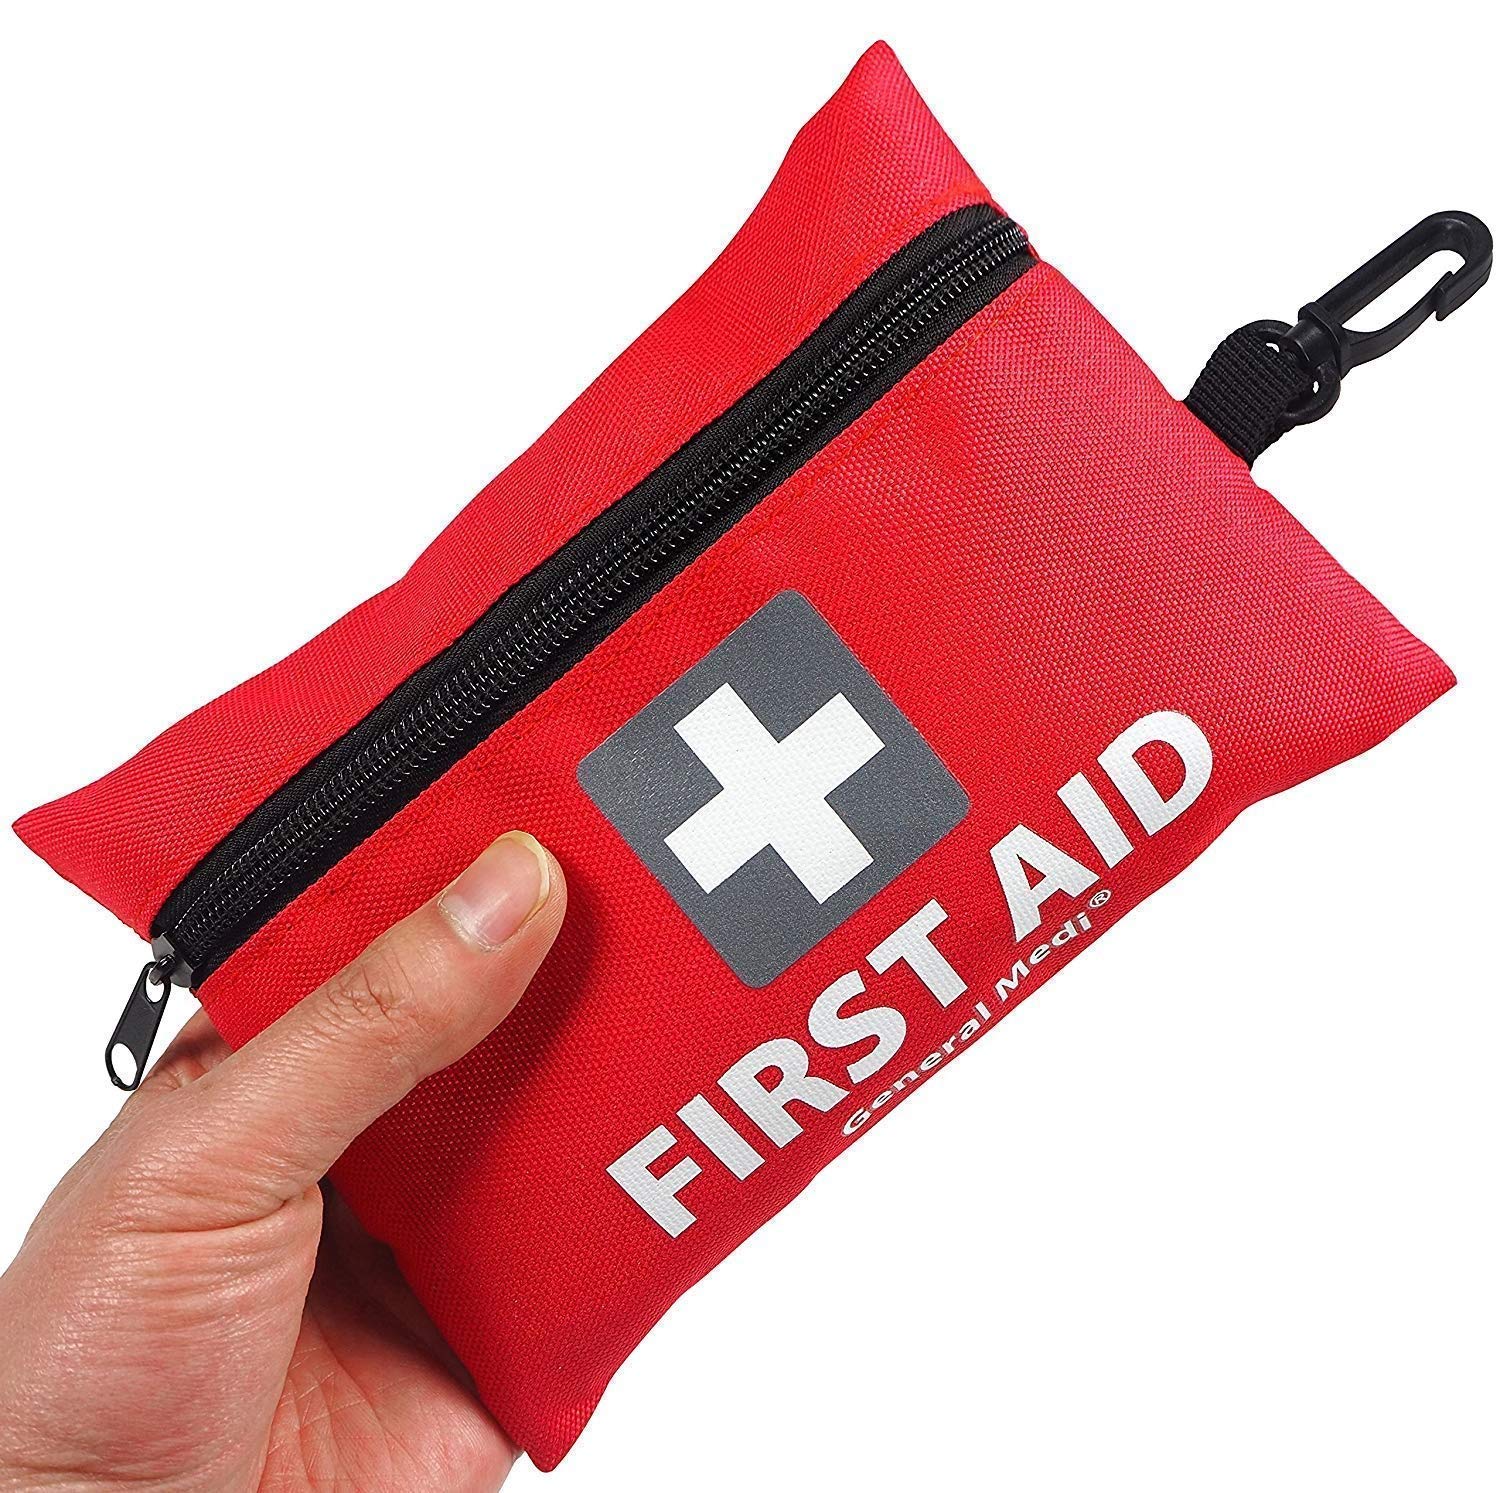 Mini First Aid Kit, 92 Pieces Small First Aid Kit - Includes Emergency Foil Blanket, Scissors for Travel, Home, Office, Vehicle, Camping, Workplace & Outdoor (Red)